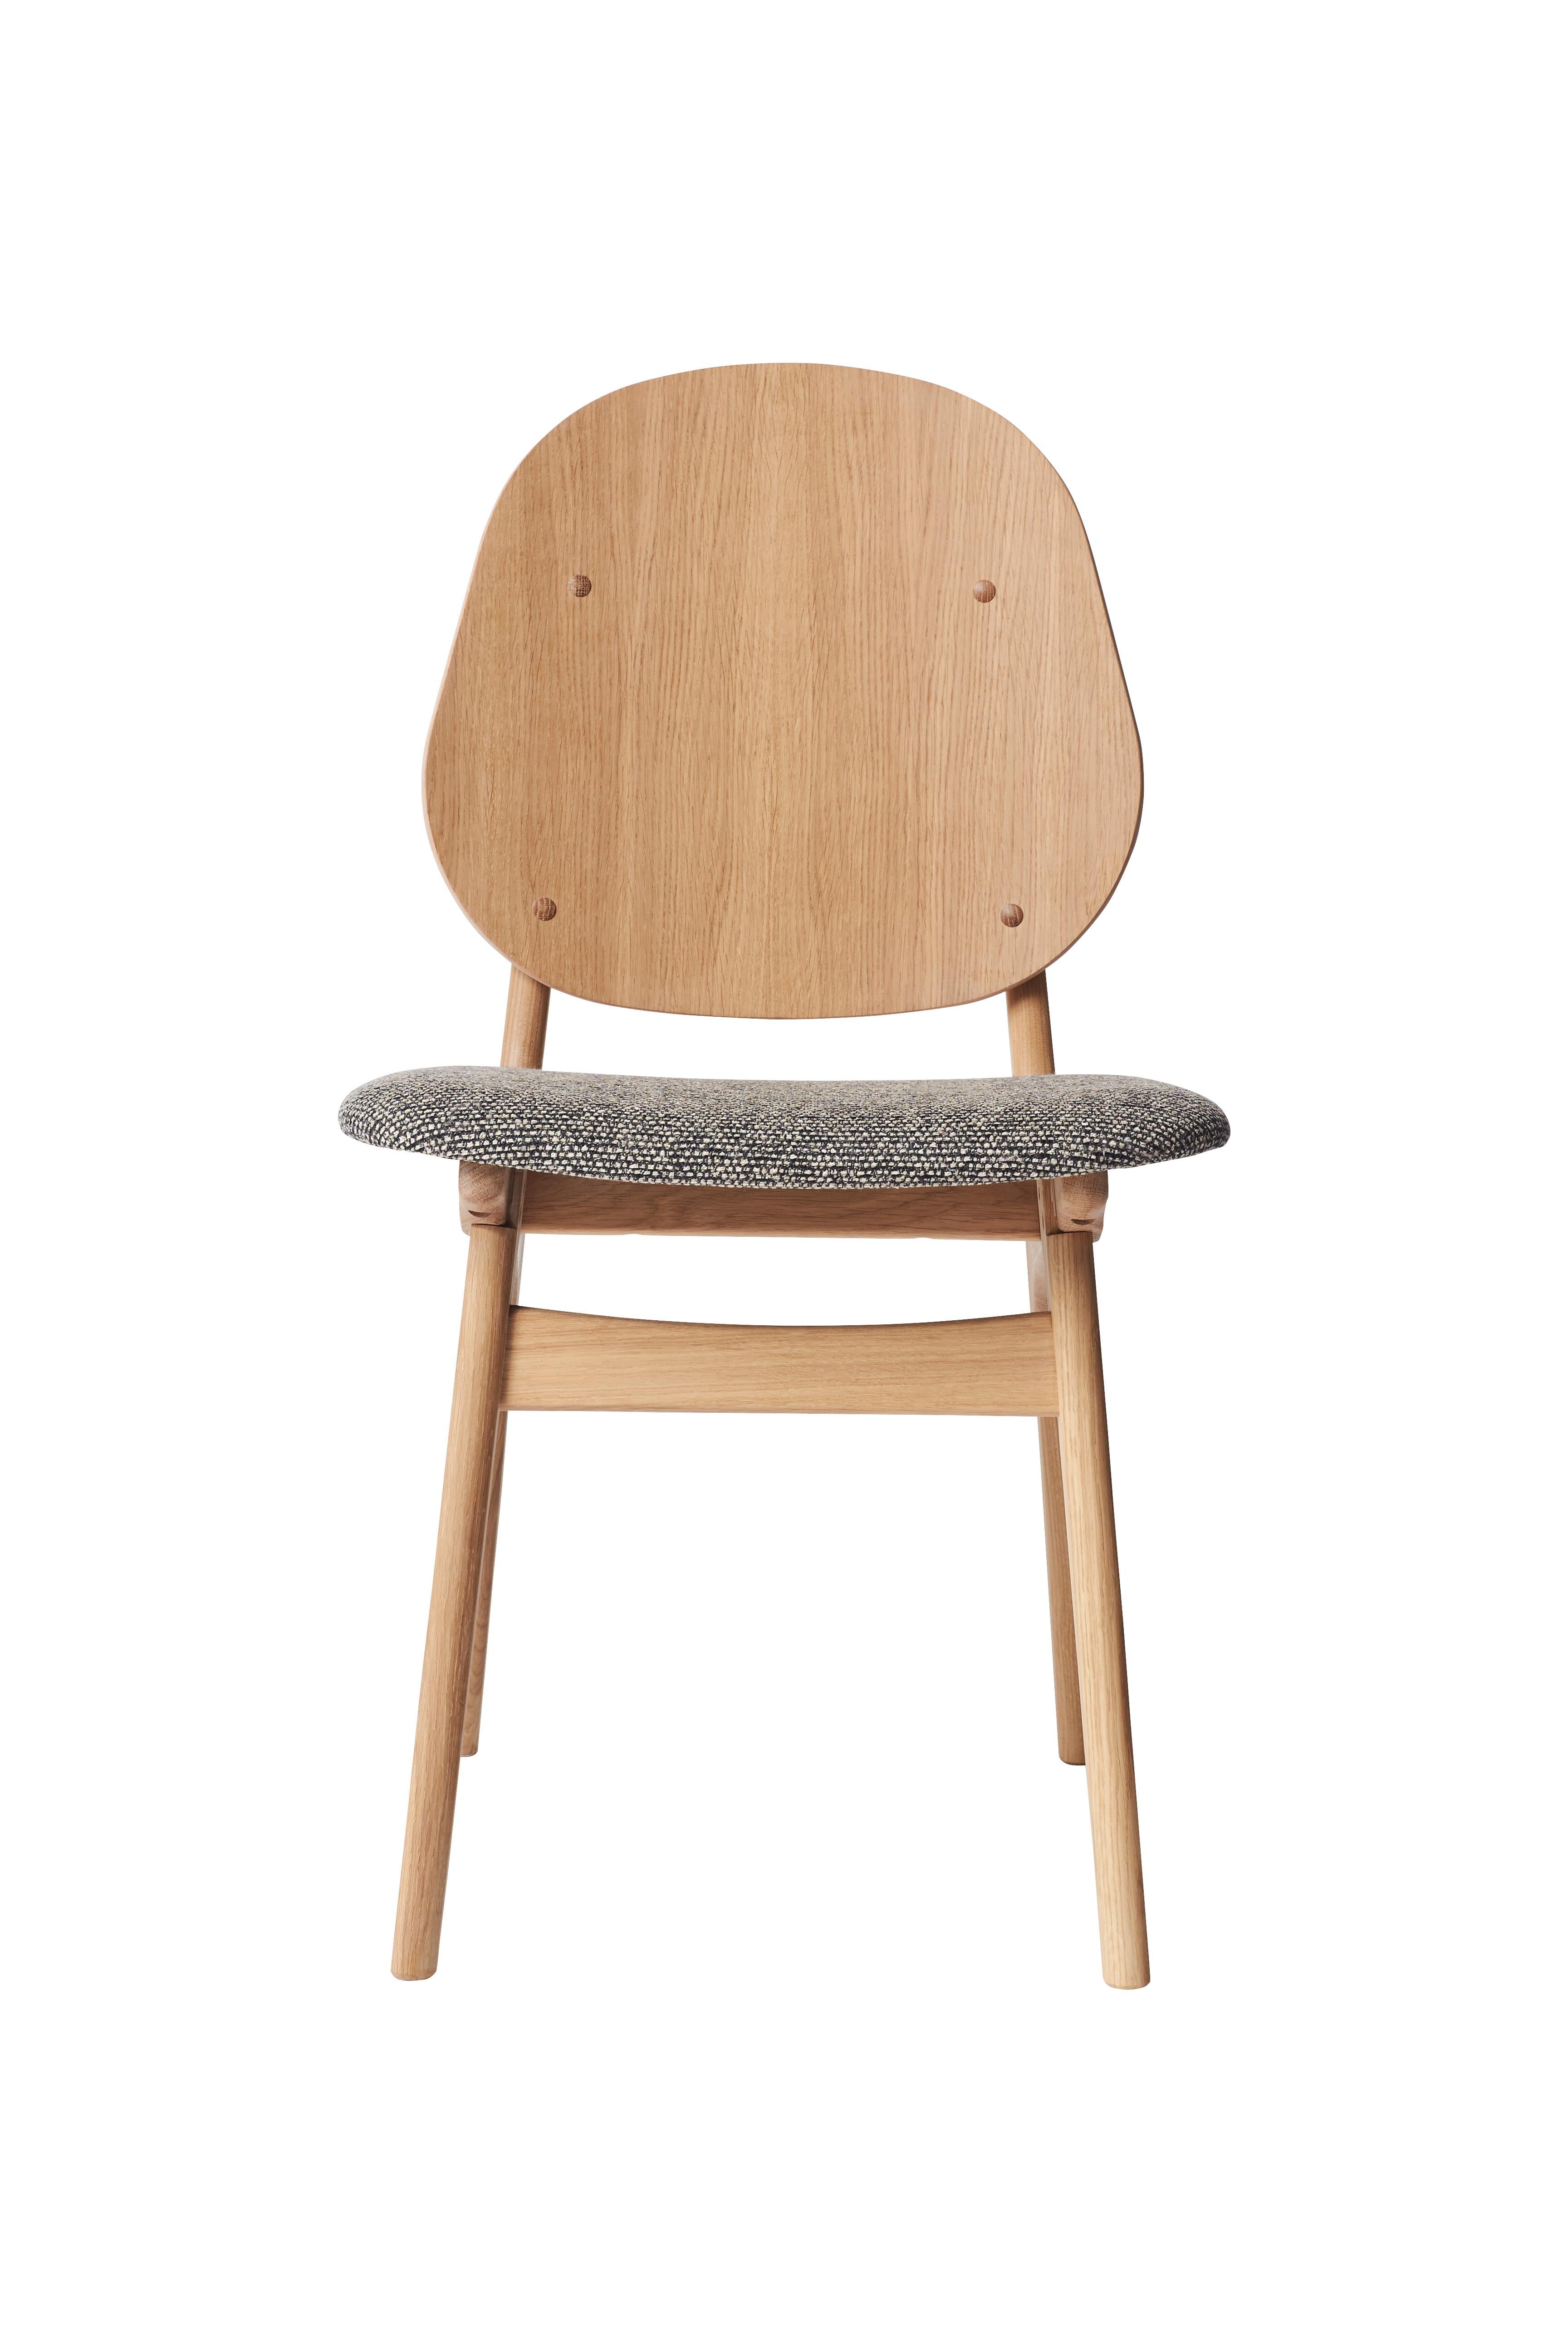 For Sale: Black (Savanna 152) Noble Chair in Oak with Upholstery, by Arne Hovmand-Olsen from Warm Nordic